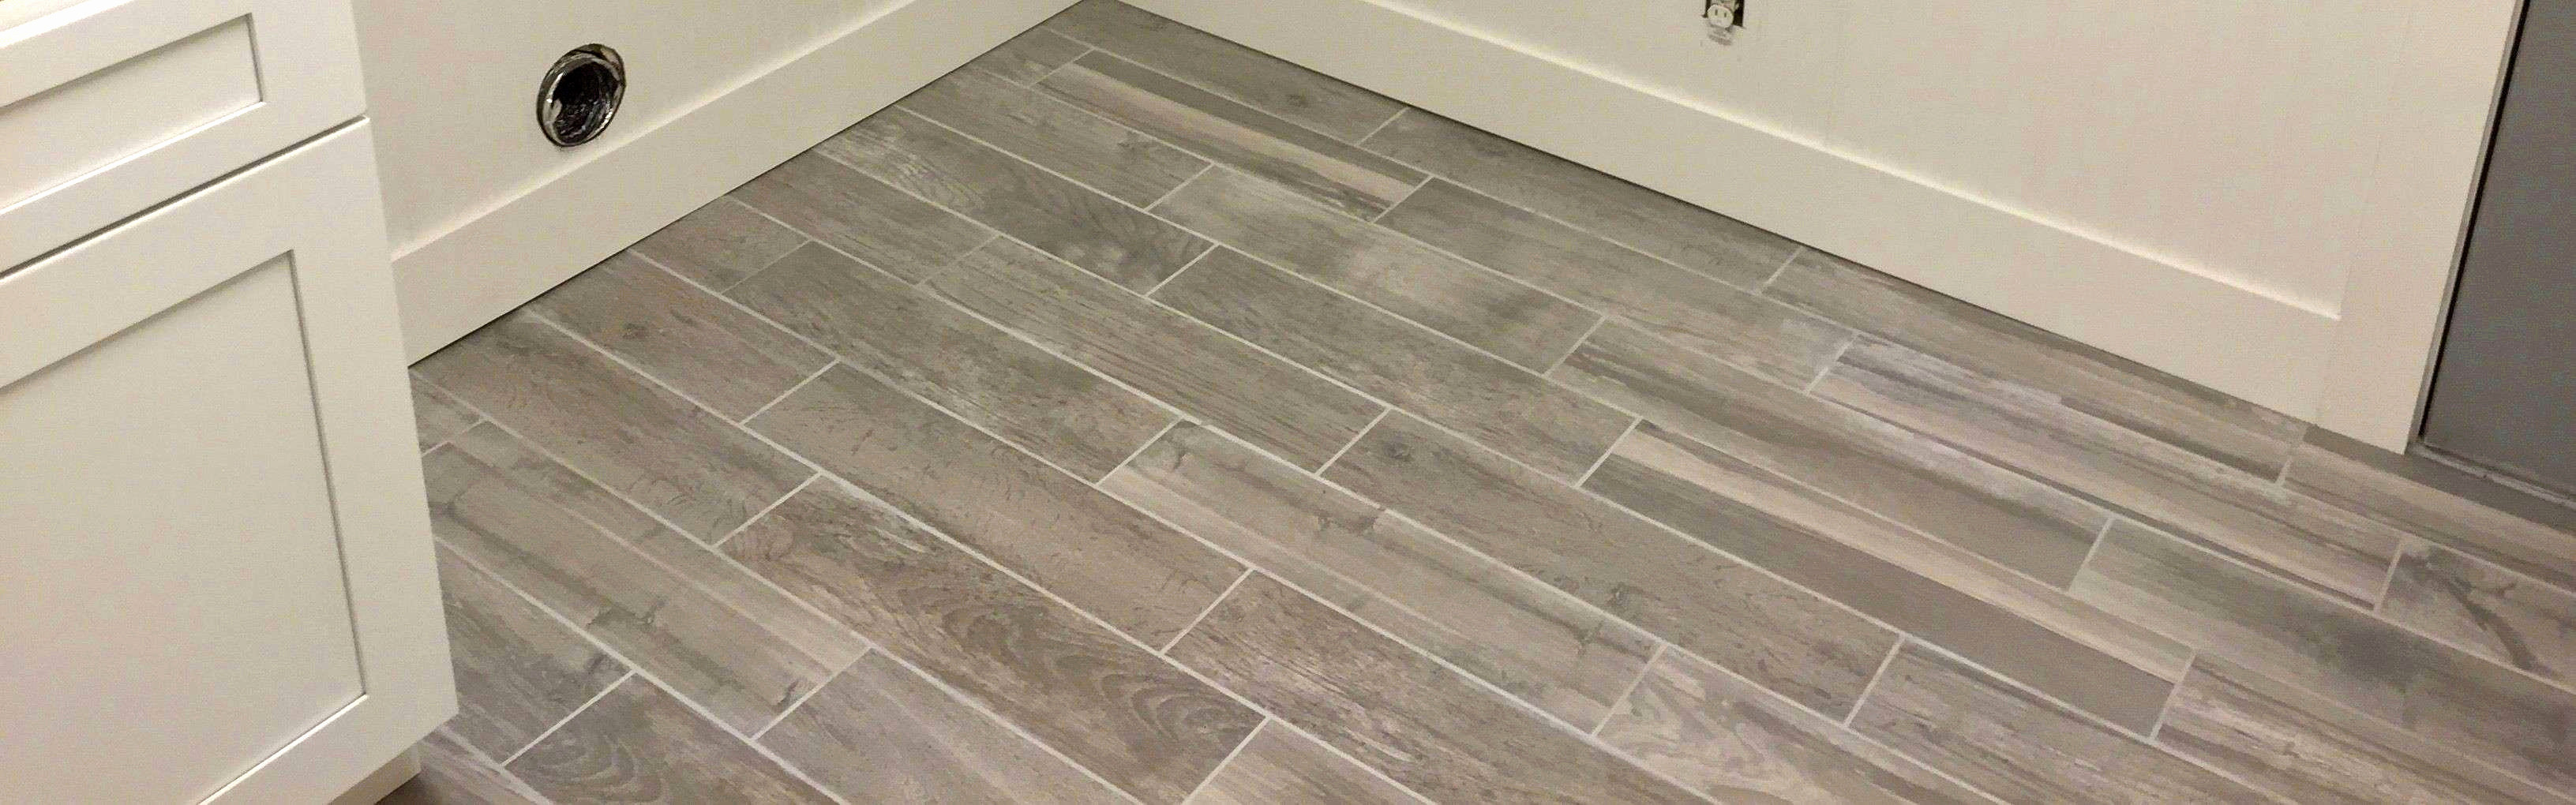 16 Nice What is the Cost to Refinish Hardwood Floors 2024 free download what is the cost to refinish hardwood floors of ceramic tile contractors floor plan ideas throughout unique bathroom tiling ideas best h sink install bathroom i 0d exciting beautiful fresh b